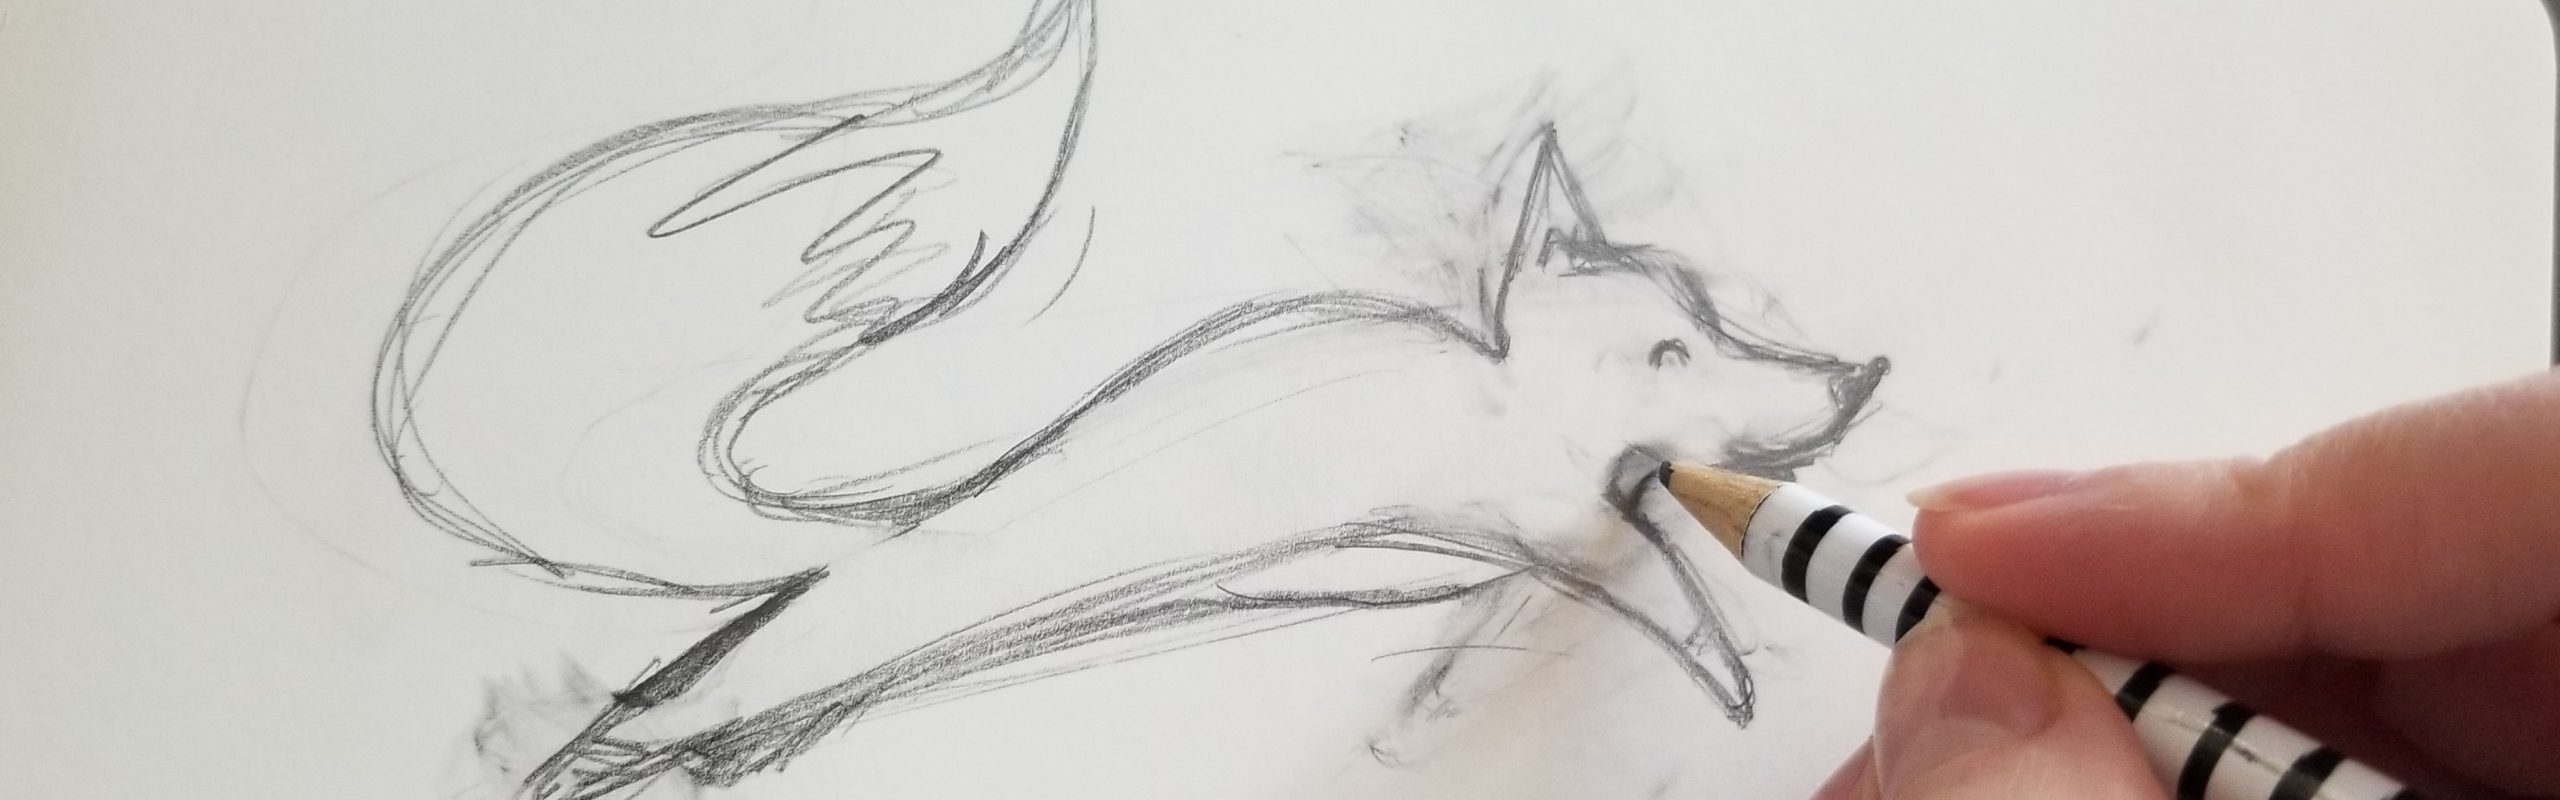 A hand holding a pencil sketches the figure of a little fox on a piece of paper for Fox Therapy.